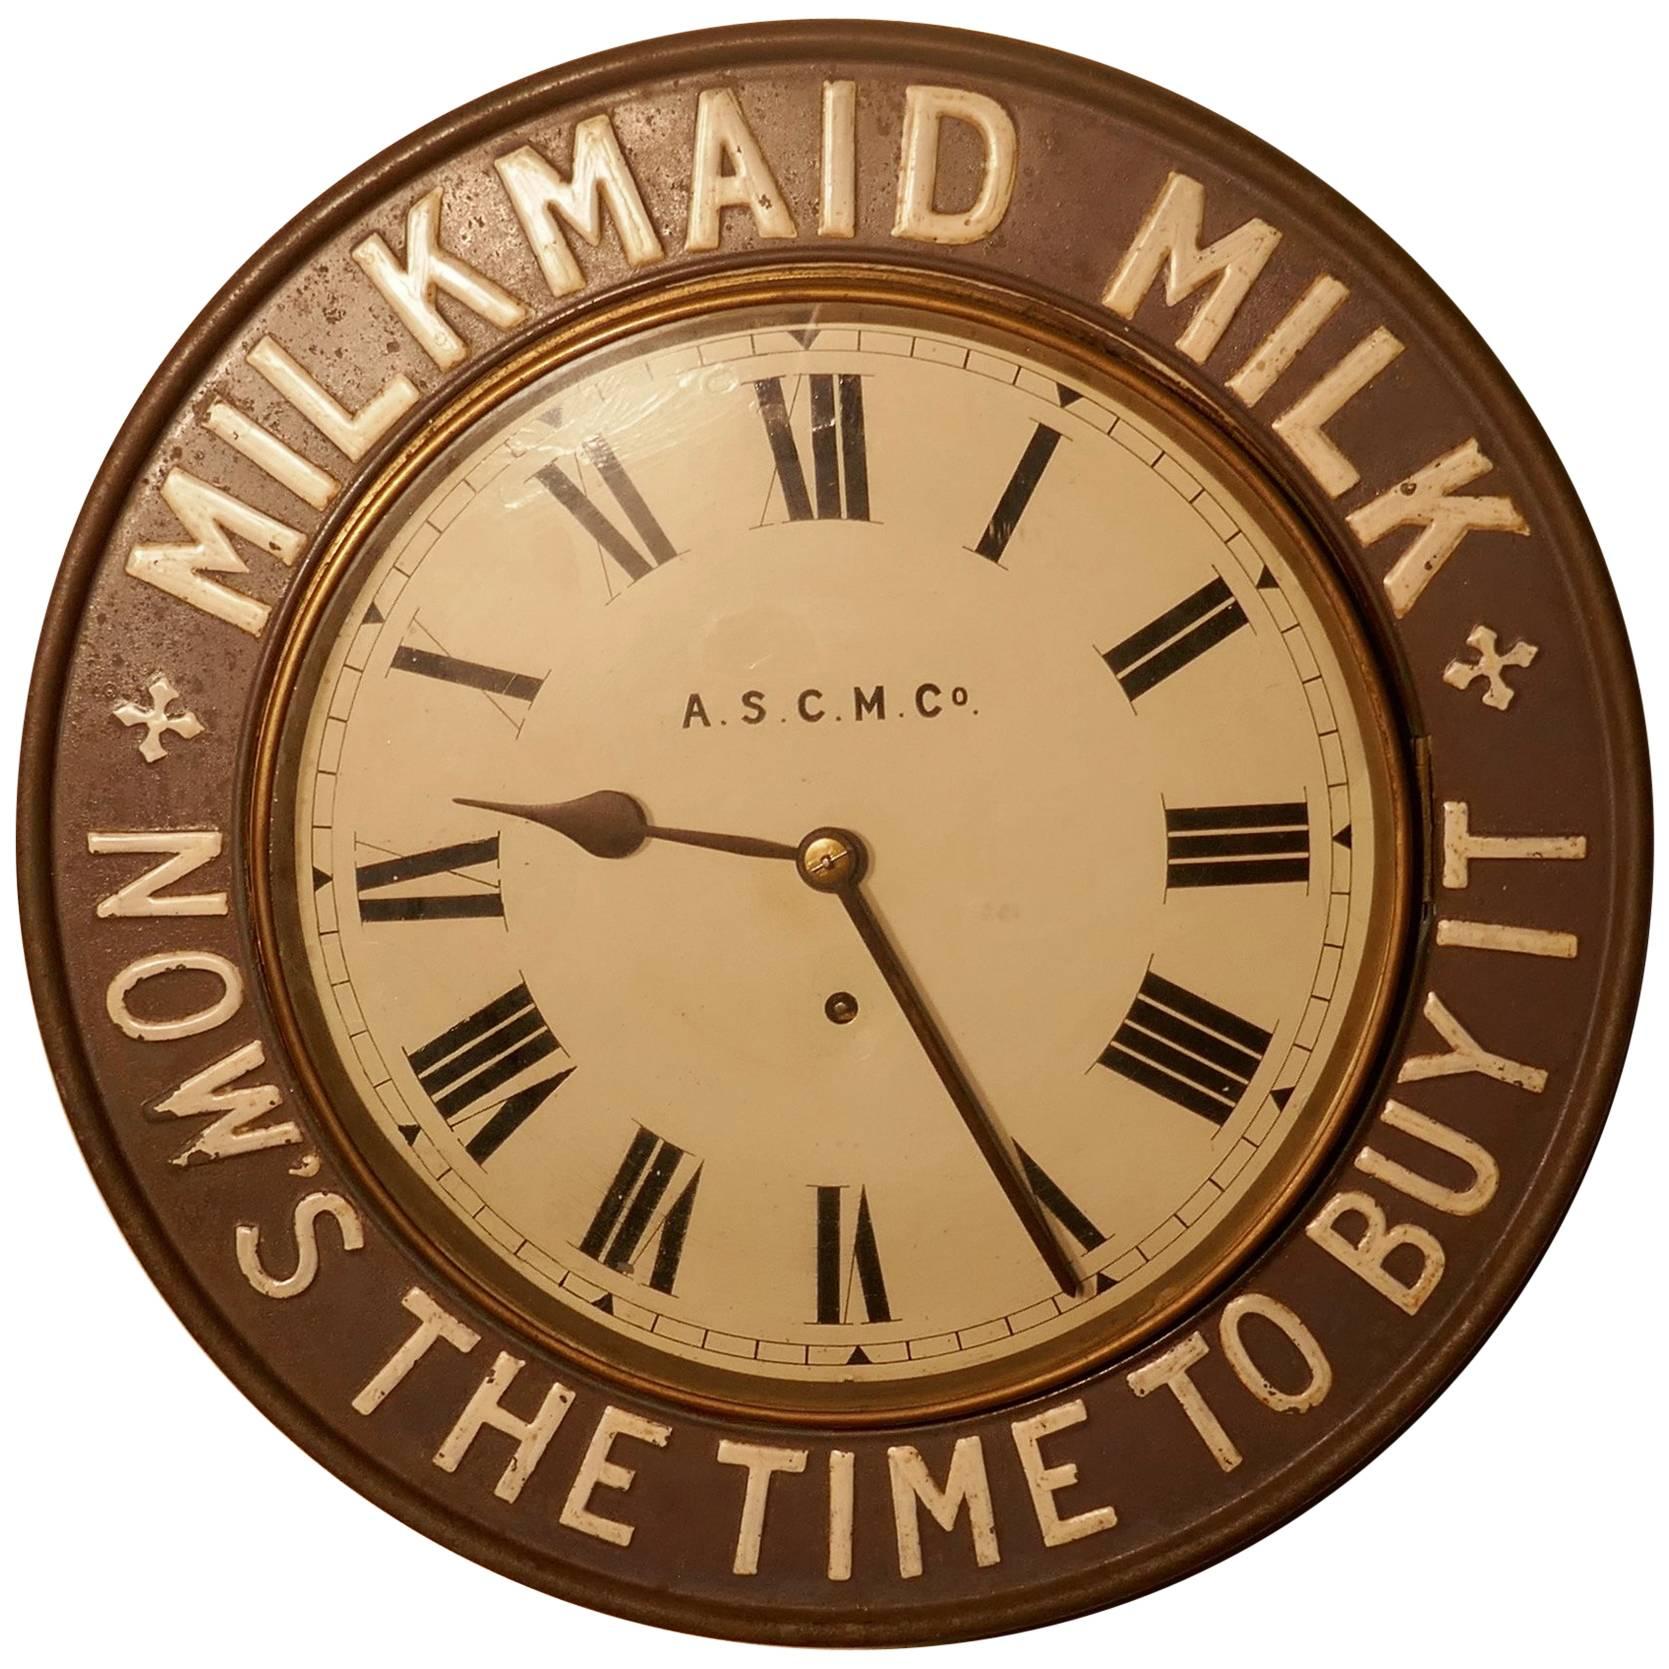 Original Mikmaid Milk Advertising Clock, from 1890 by the A.S.C.M Co